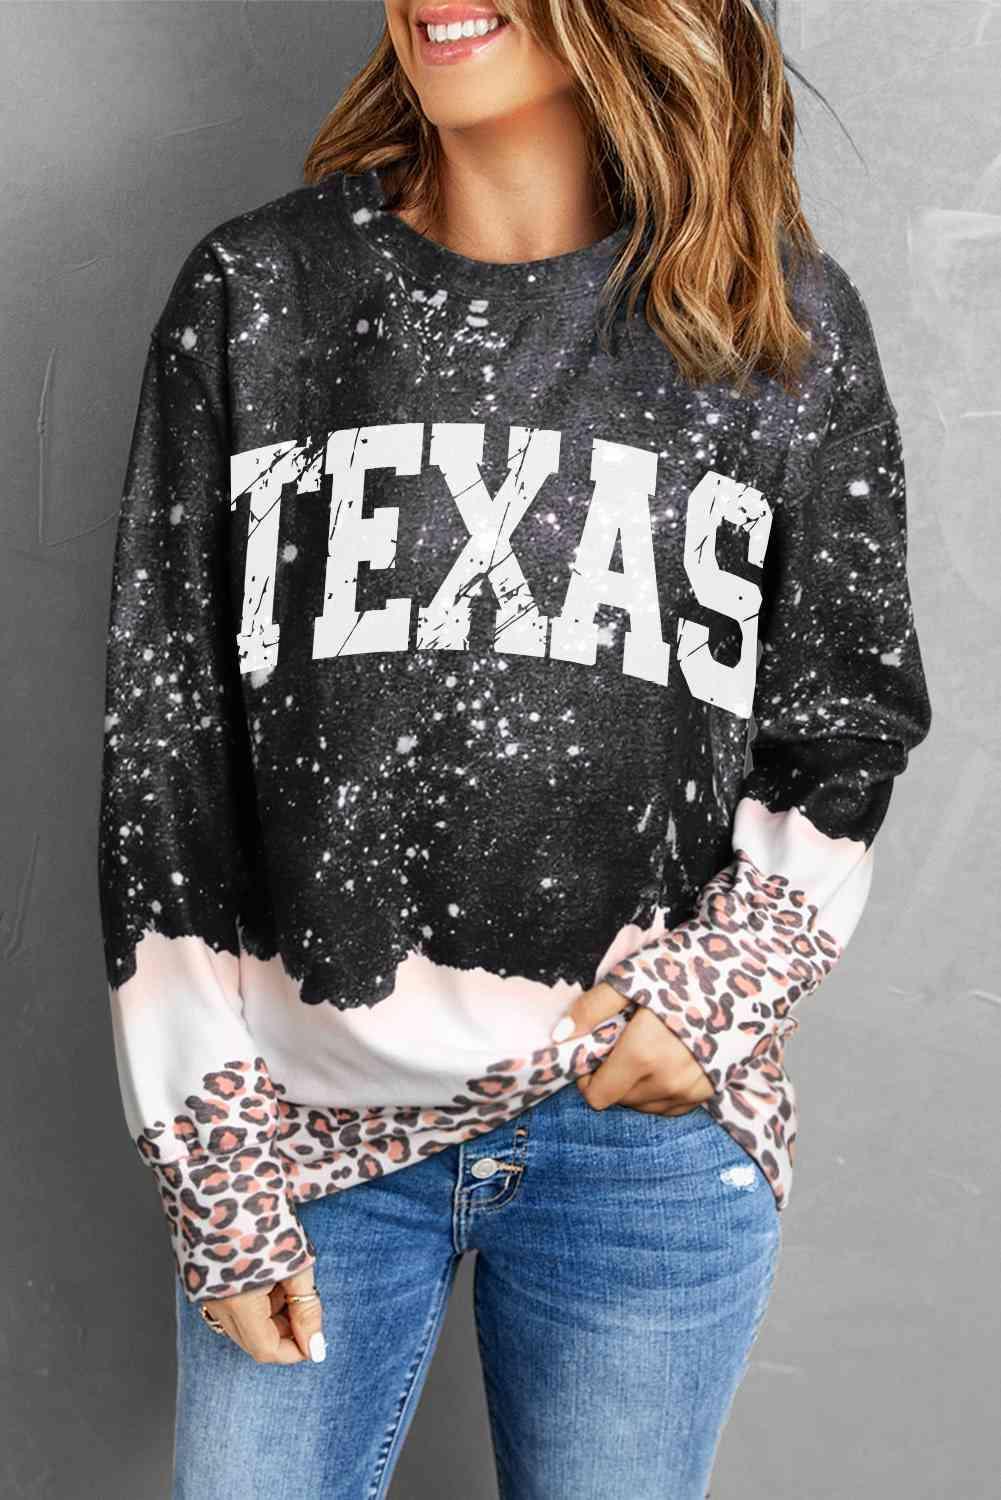 a woman wearing a sweatshirt with the word texas printed on it